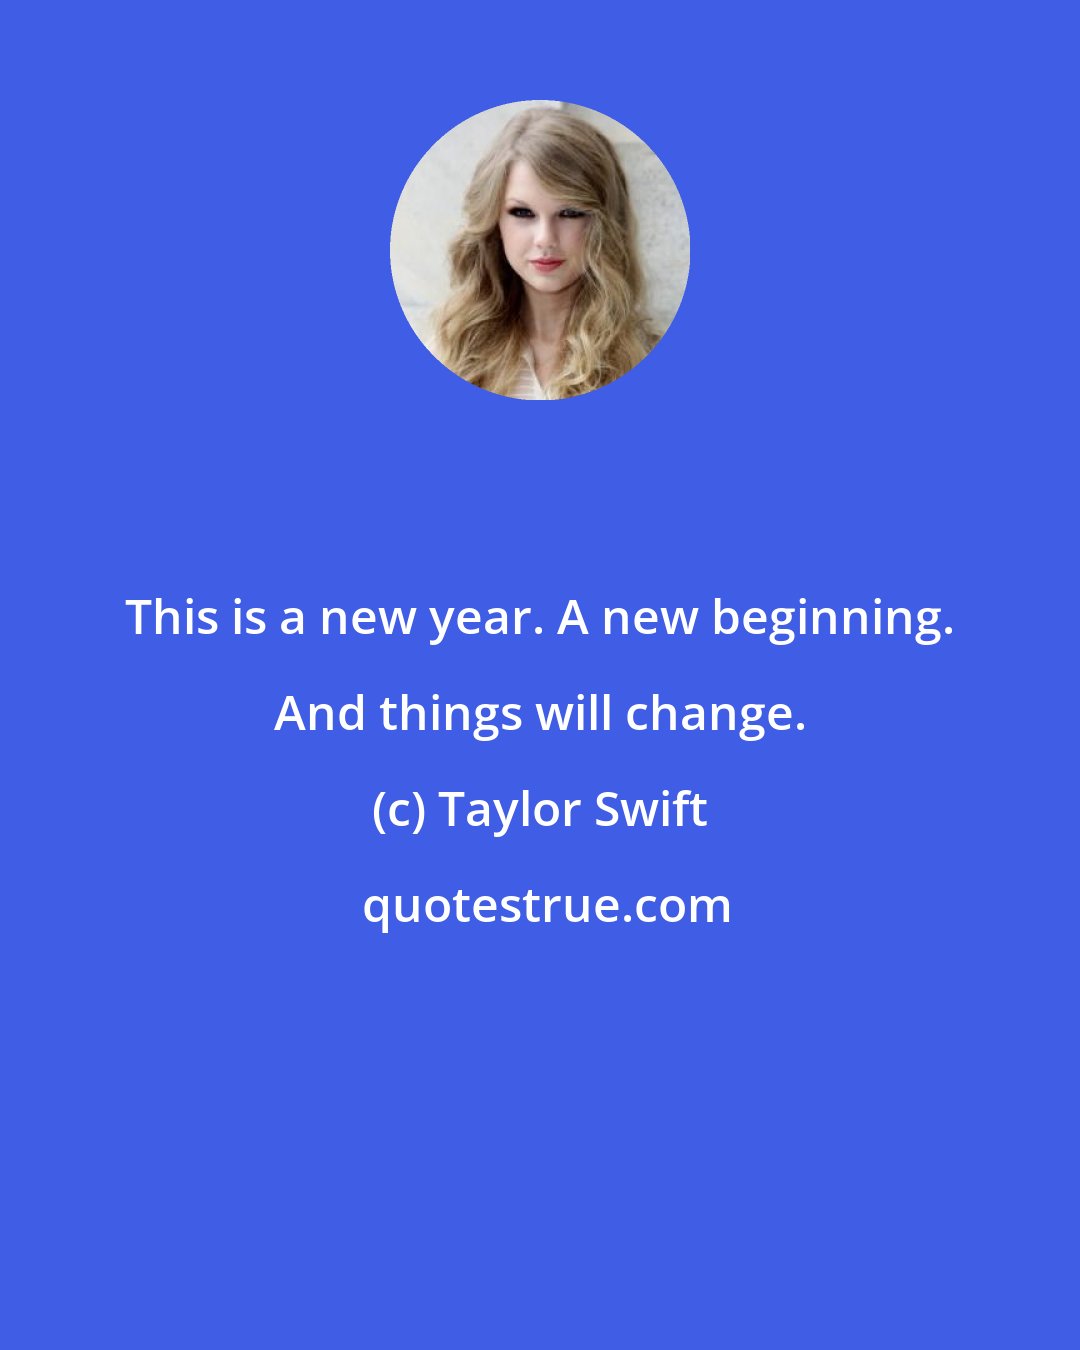 Taylor Swift: This is a new year. A new beginning. And things will change.